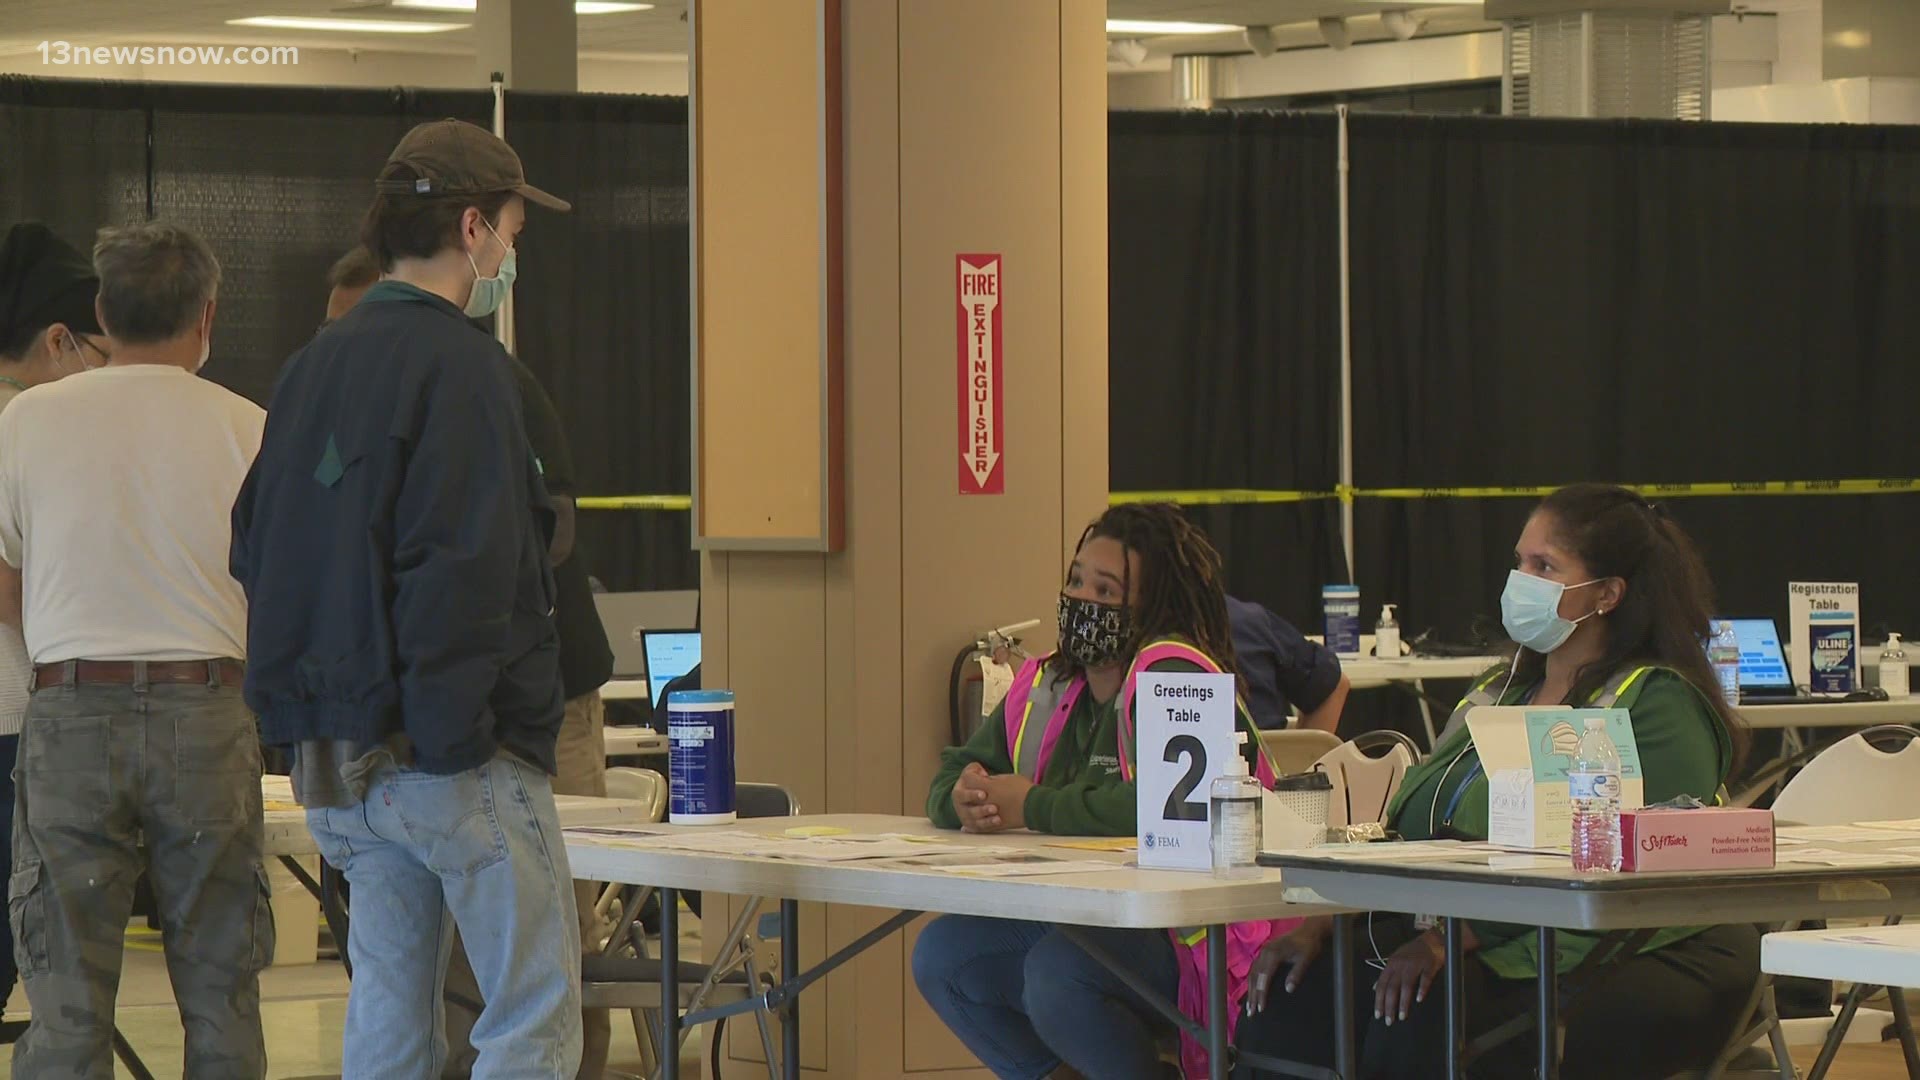 FEMA representatives say they've experienced an influx of people showing up to get the COVID-19 vaccine at the Military Circle Mall mass vaccination site.